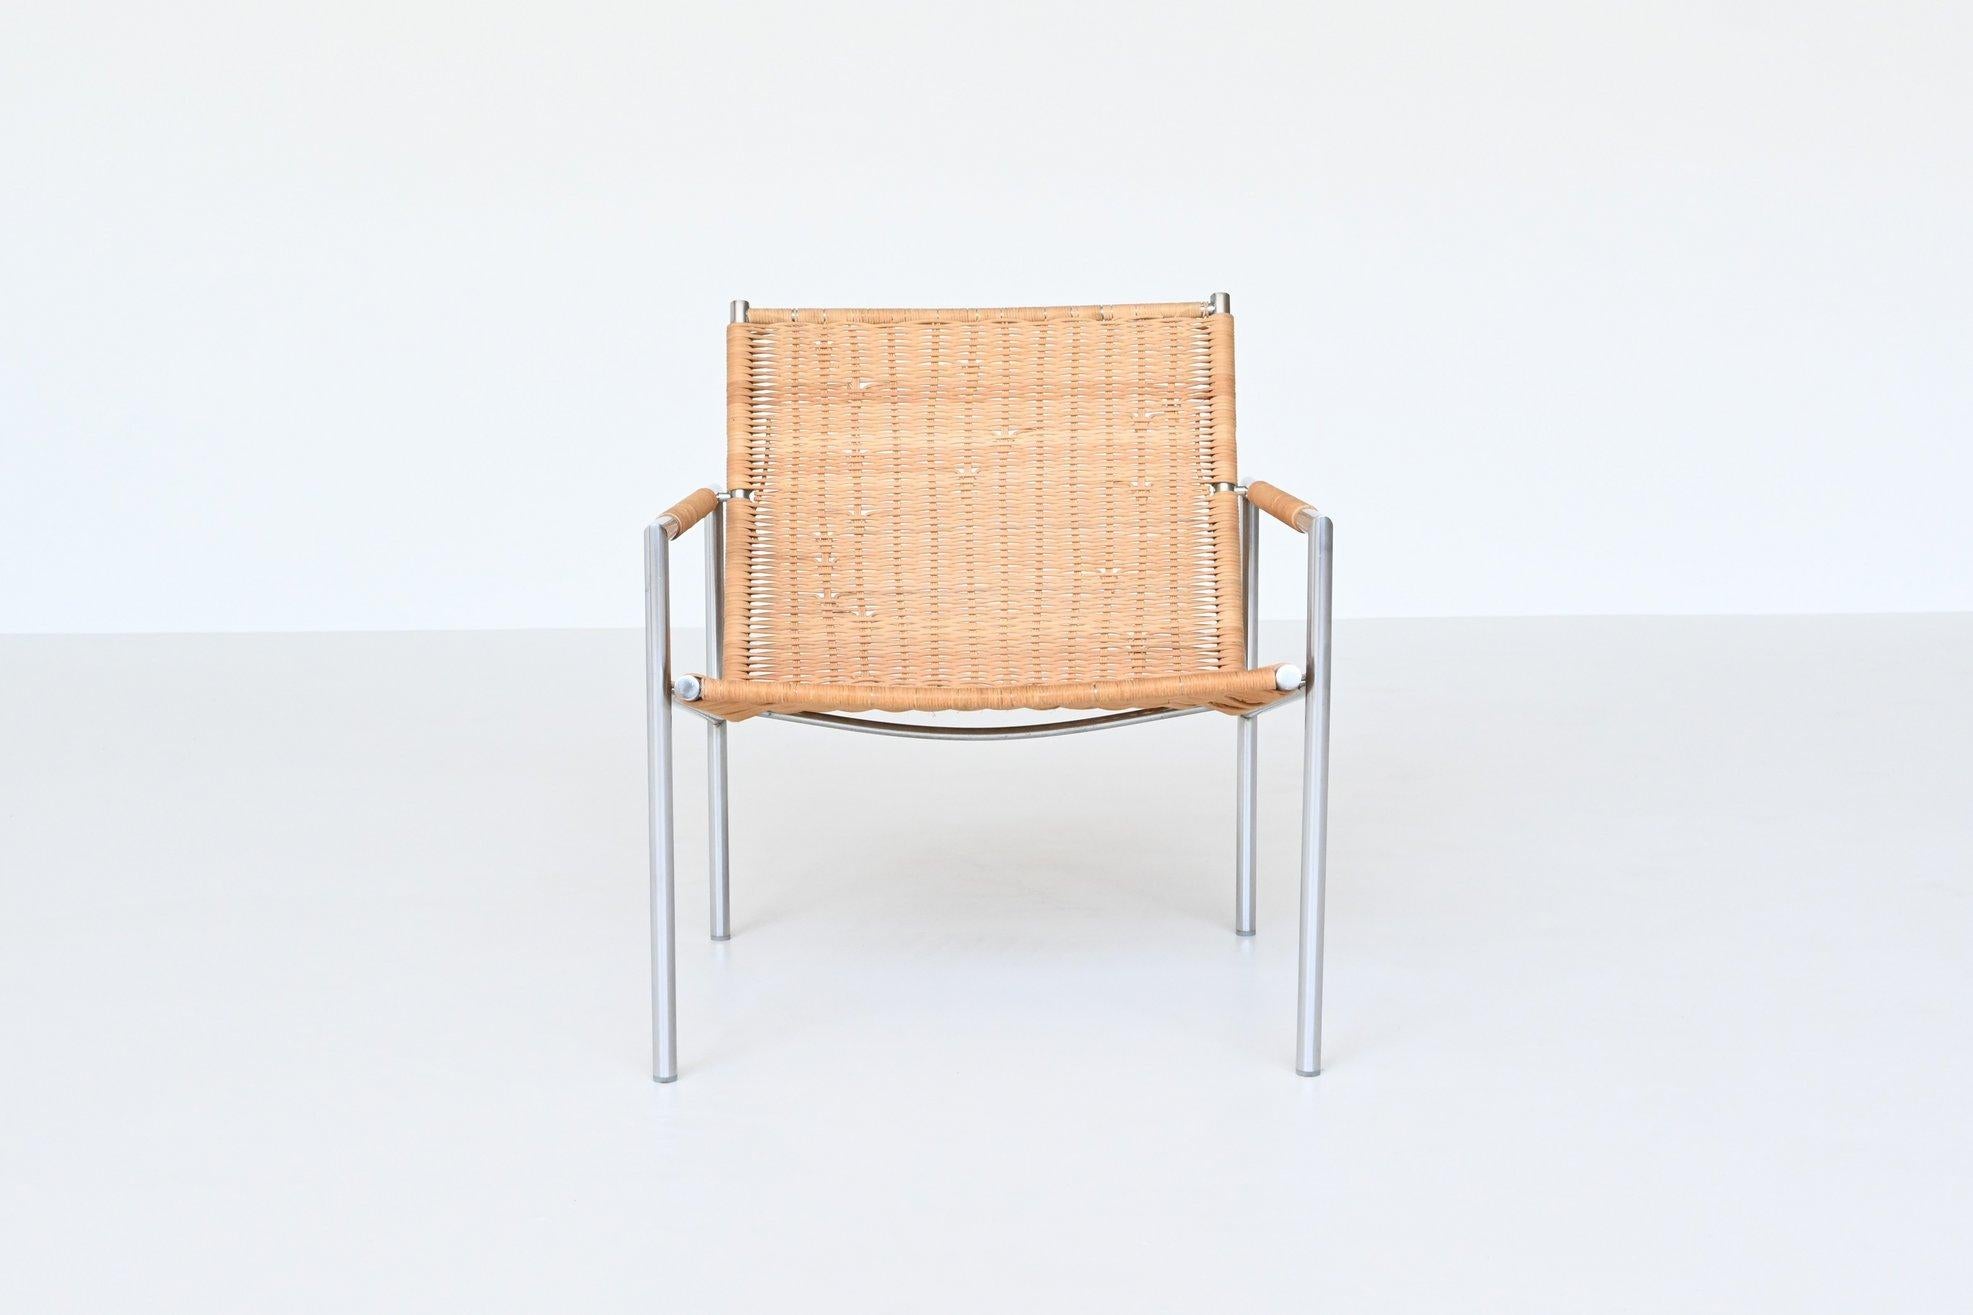 Beautiful iconic lounge chair model SZ01 designed by Martin Visser for ‘t Spectrum, The Netherlands 1965. This very nice shaped modernist chair has a brushed steel tubular frame and woven cane seat and arm rests finishing. The cane has a nice patina